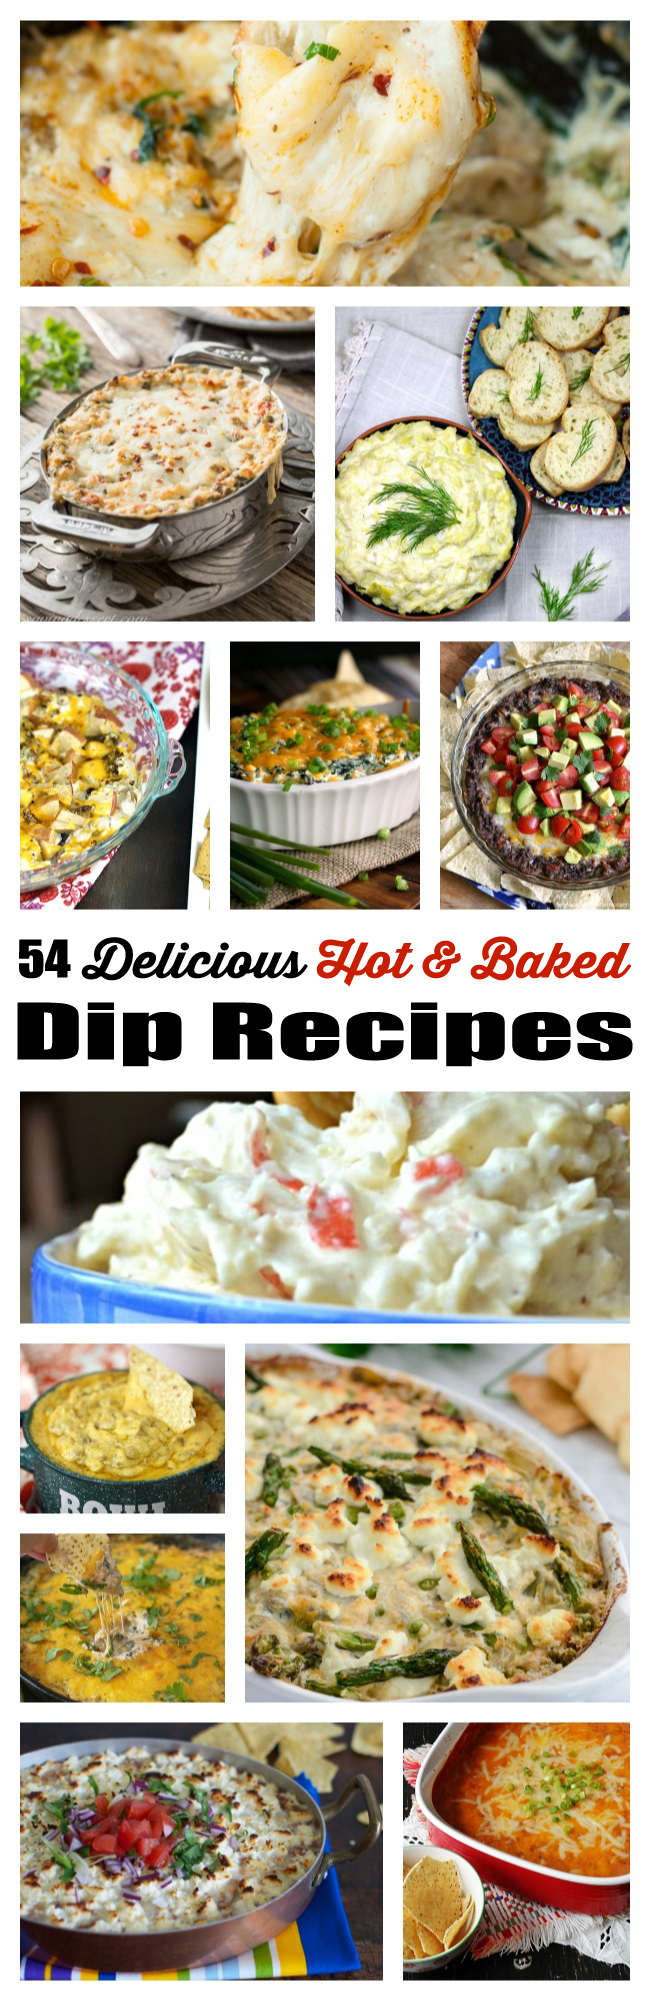 54 Delicious Hot & Baked Dip Recipes